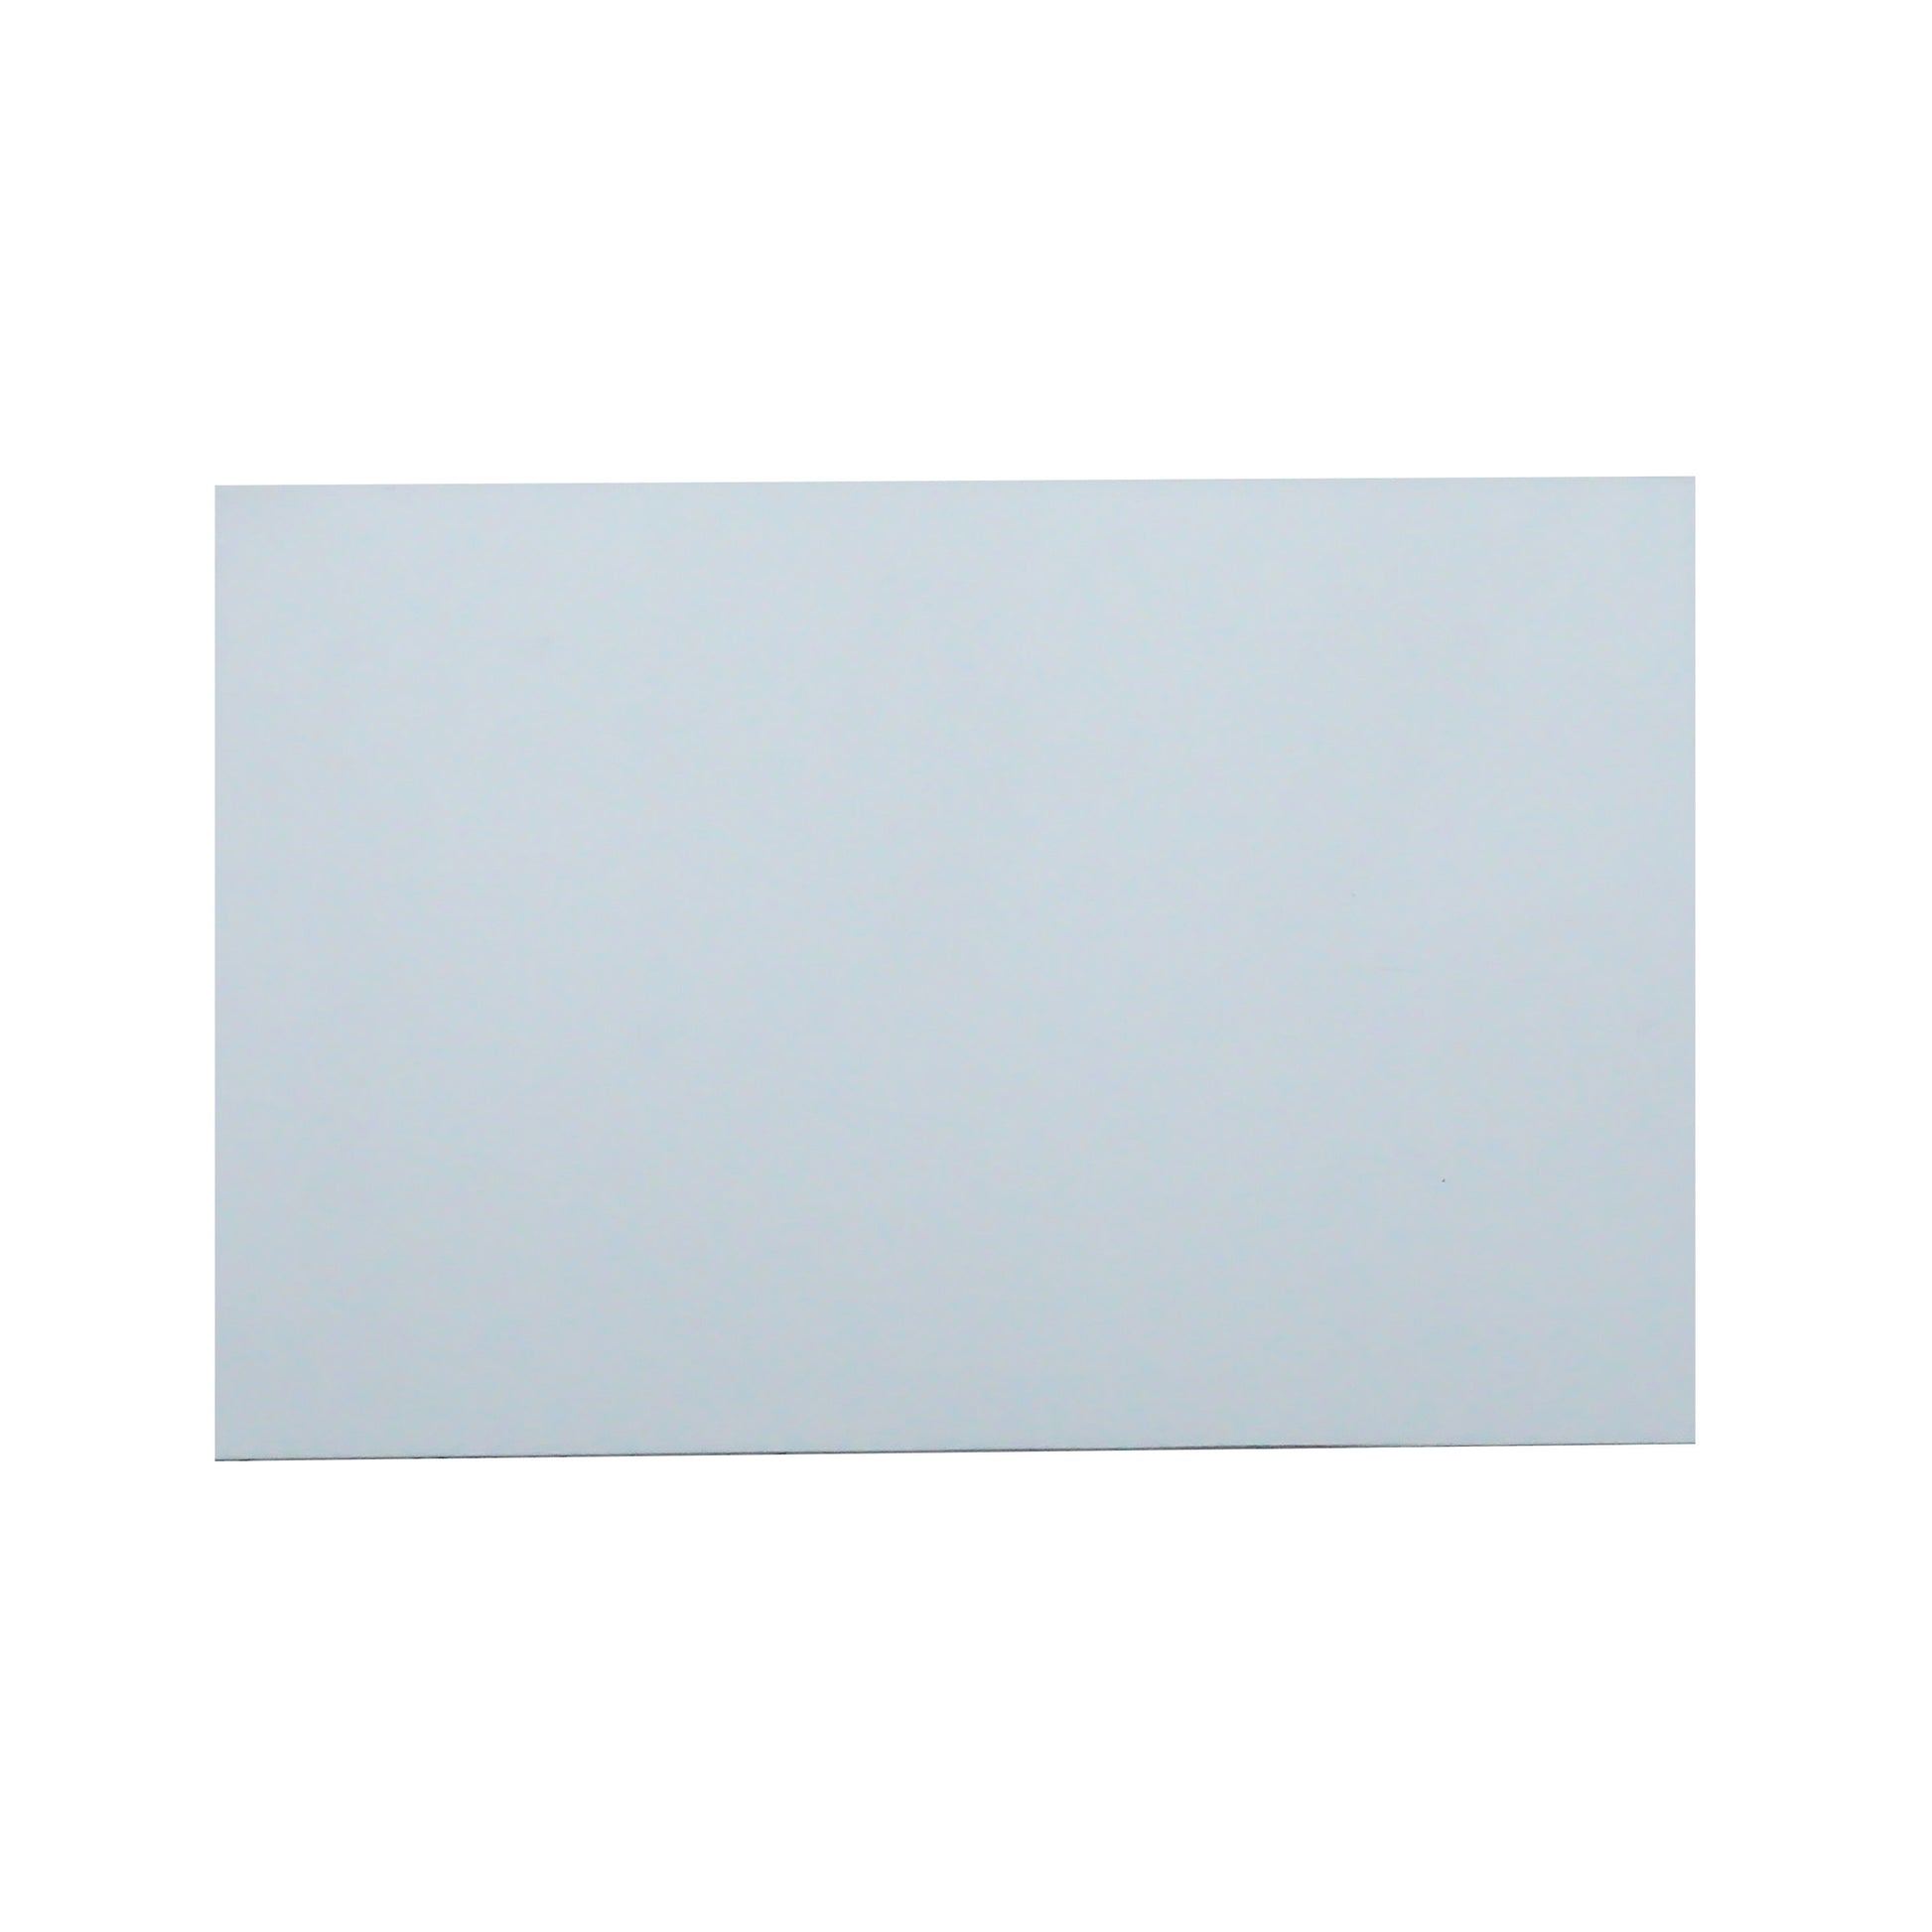 Load image into Gallery viewer, ZGN03090W/WKS Magnetic Labeling Strip w/ White Vinyl Surface - Bottom View